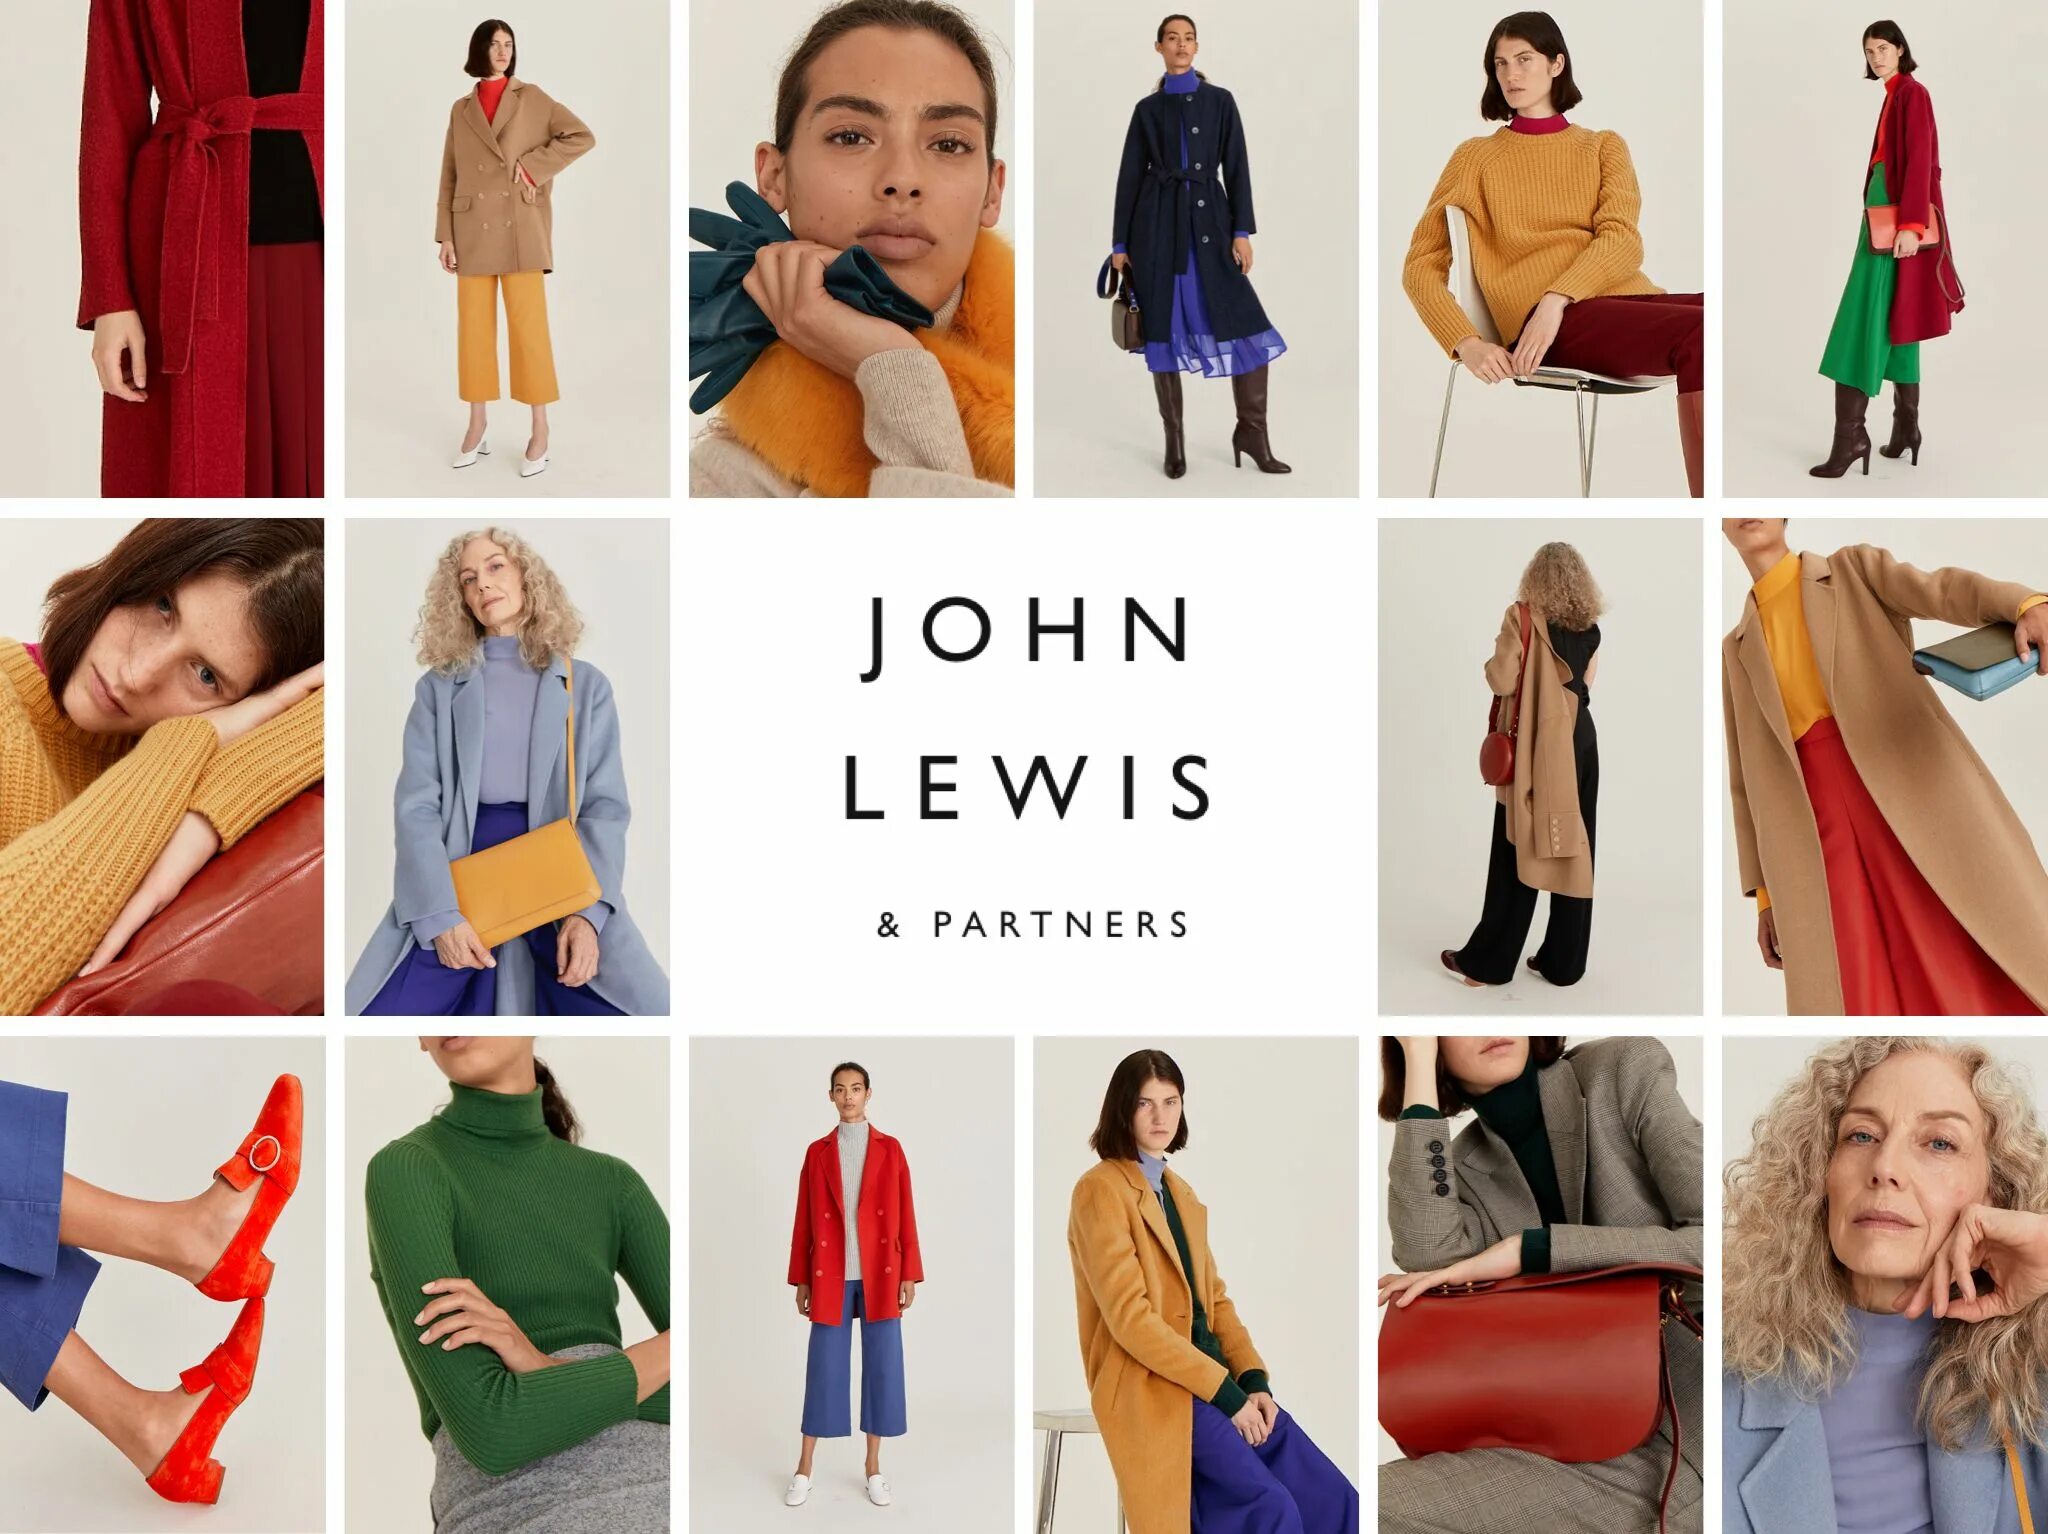 Learn to dress. John Lewis одежда. The way we Dress. Collection by John Lewis одежда. The way we Dress презентация.